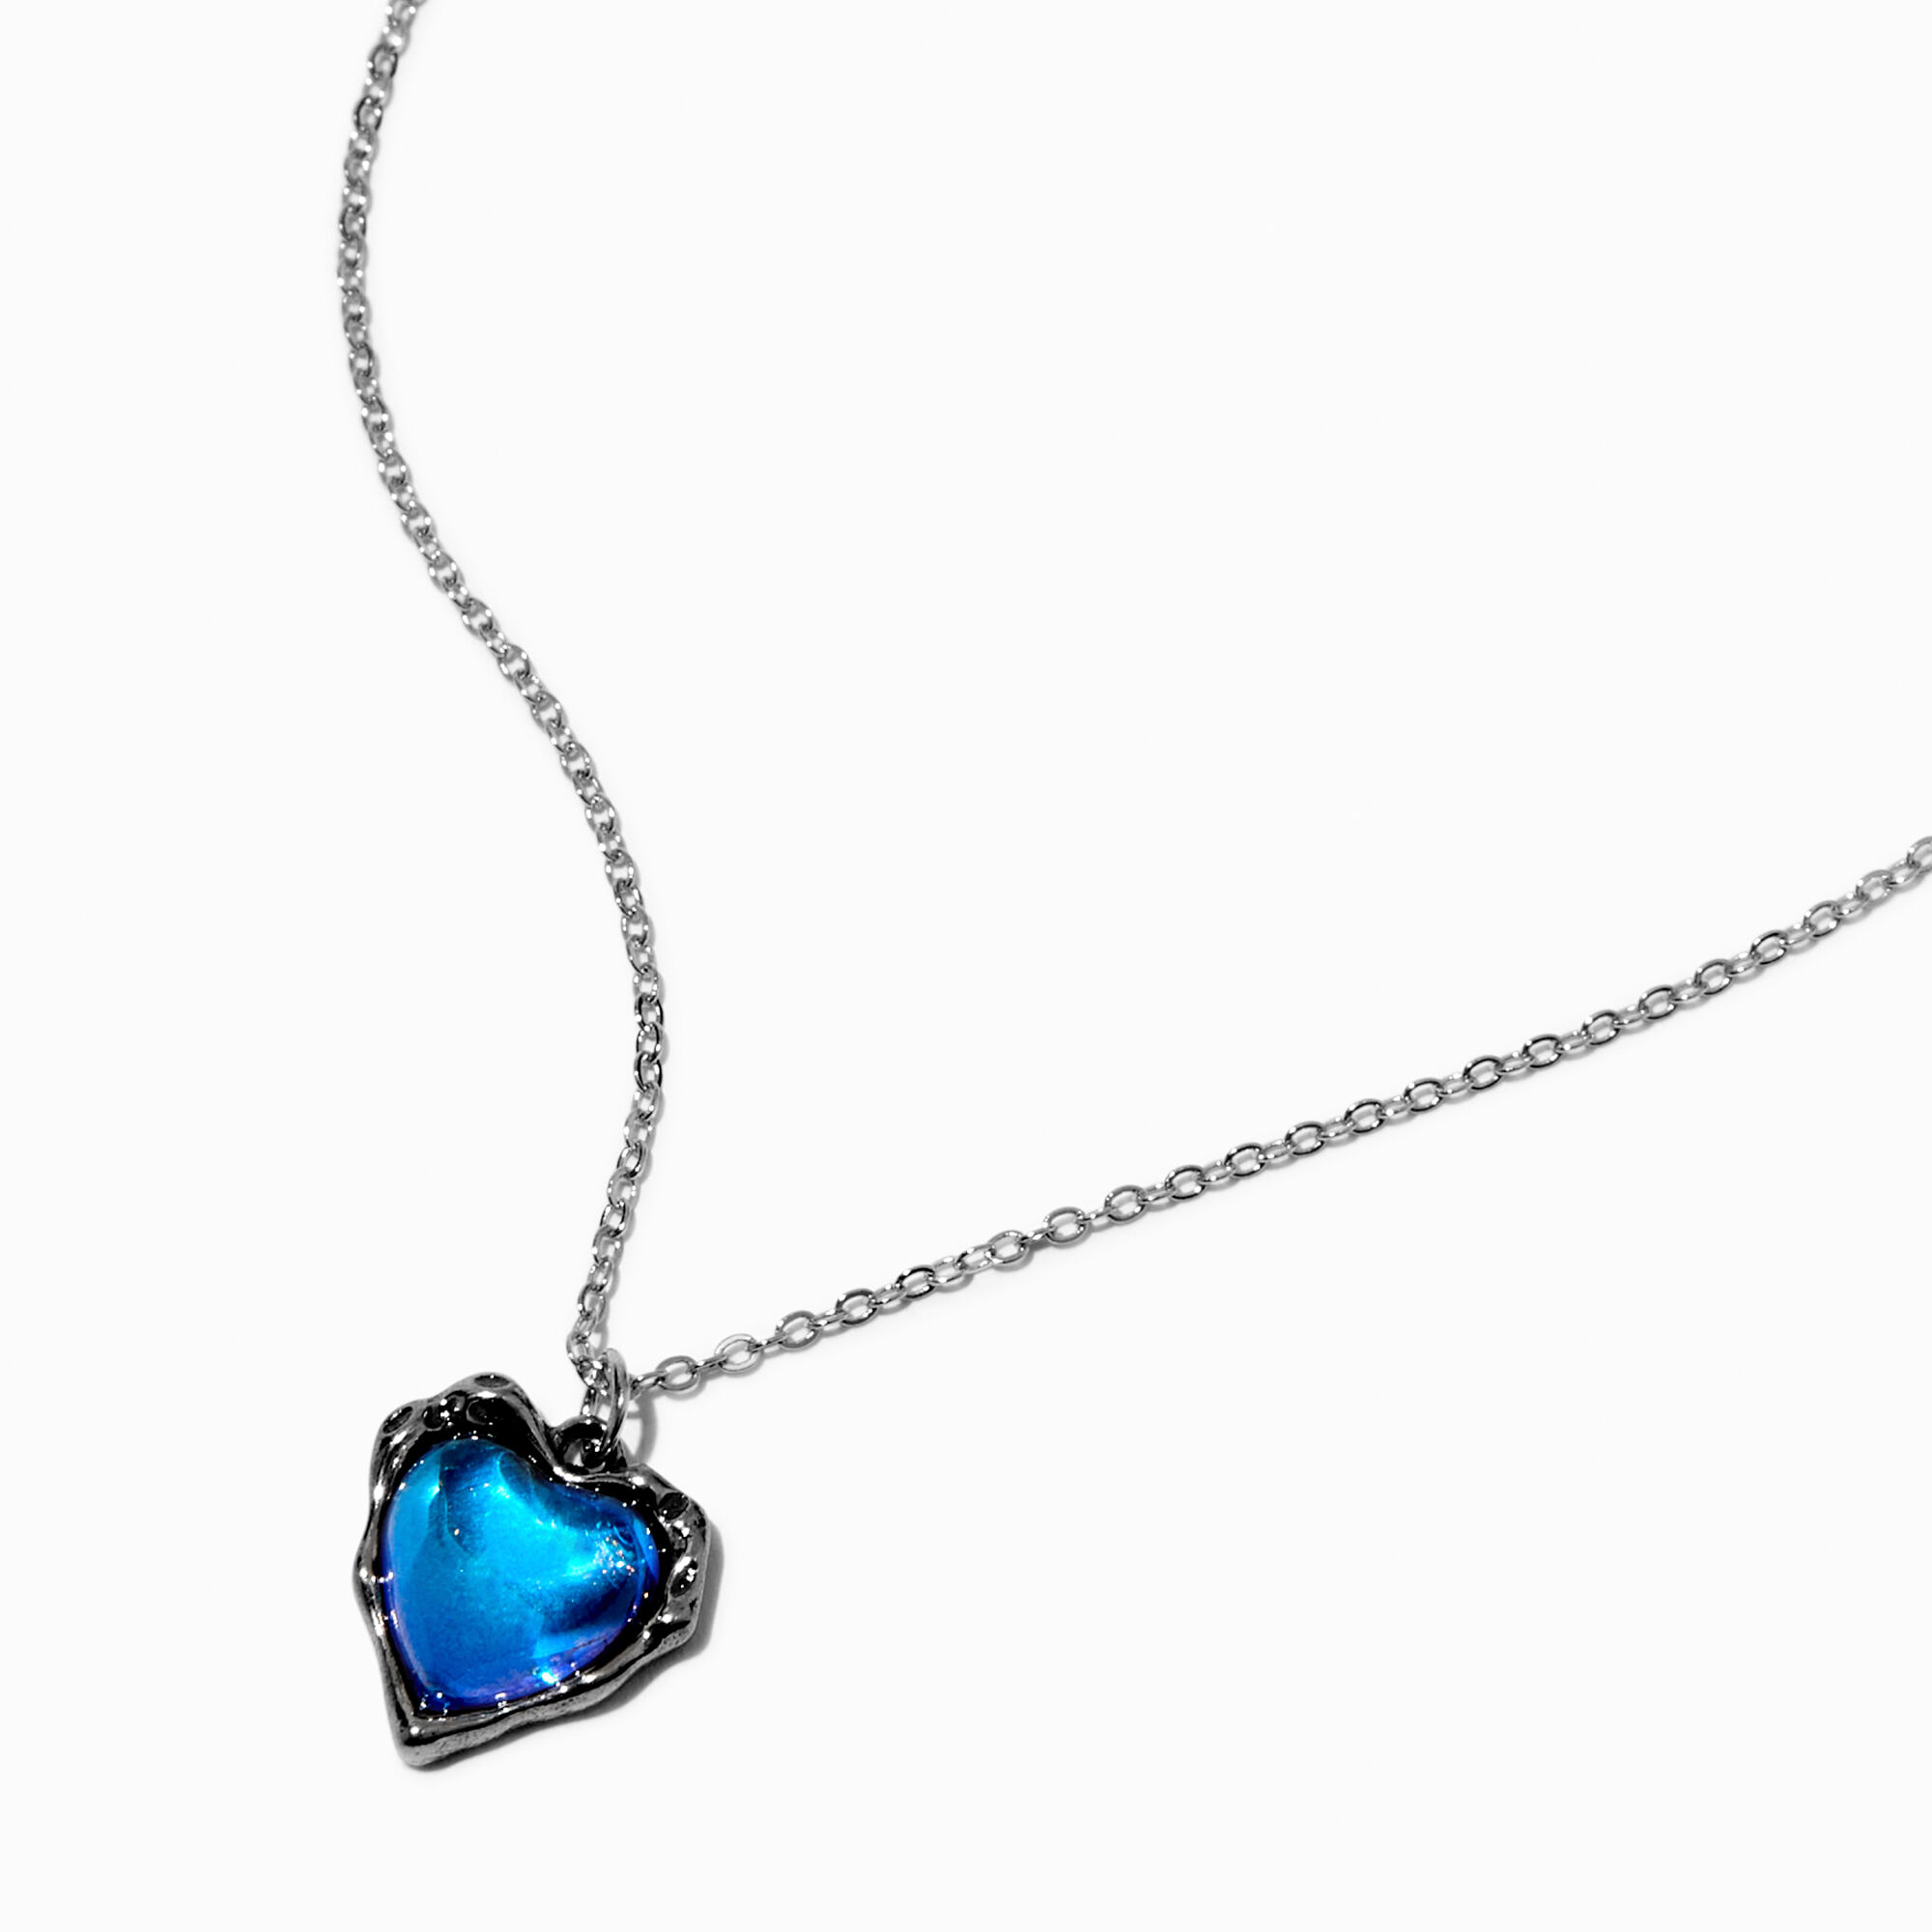 View Claires Melting Heart SilverTone Pendant Necklace Blue information